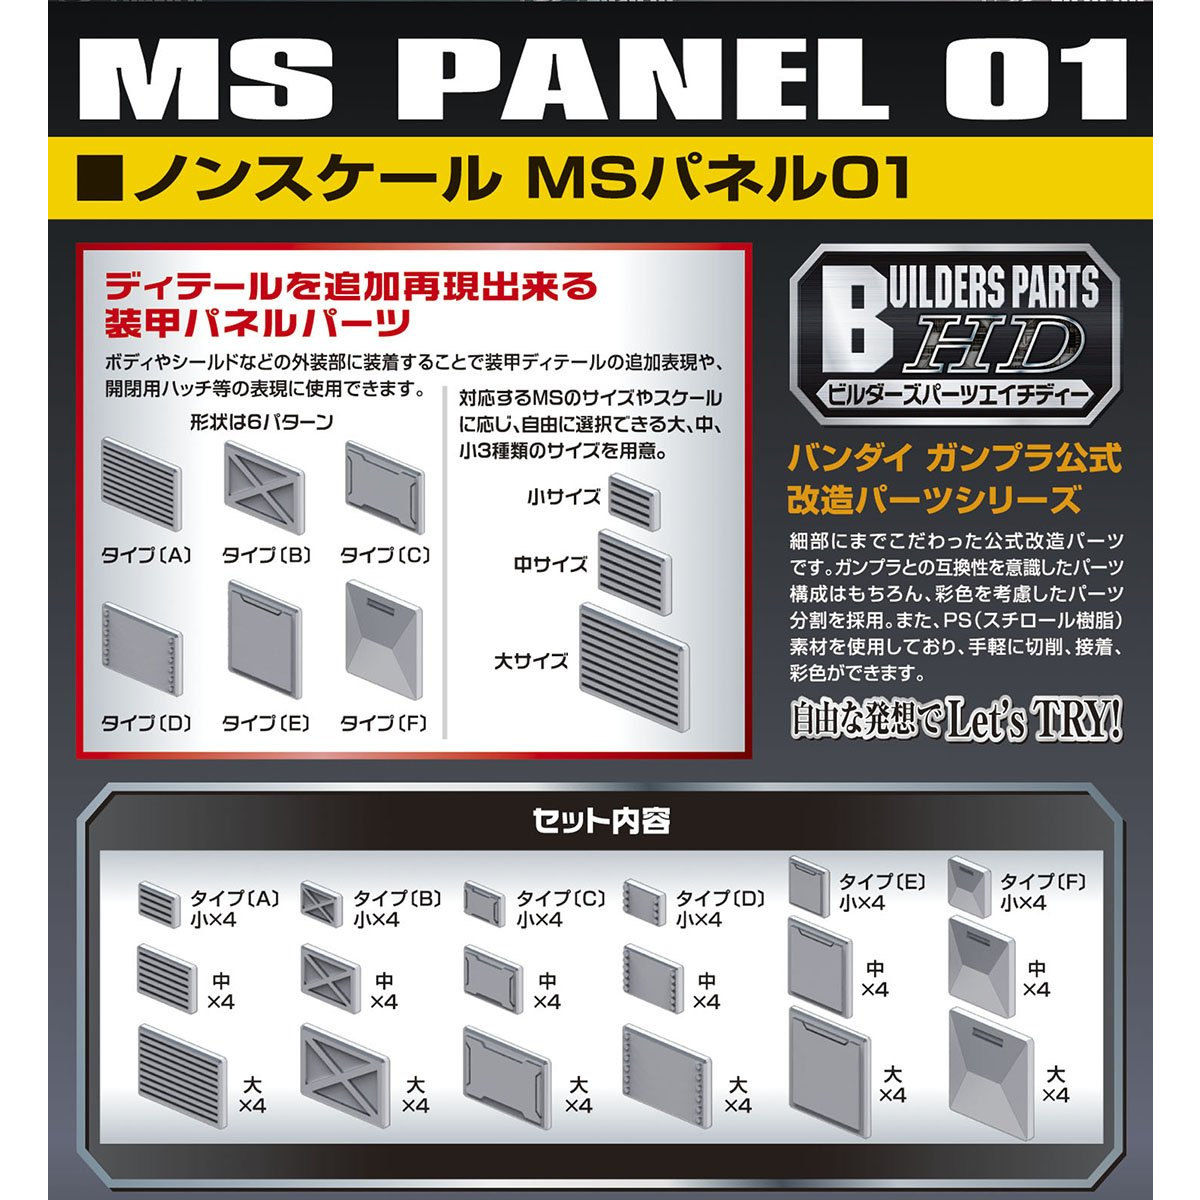 Builders Parts - HD MS Panel 01